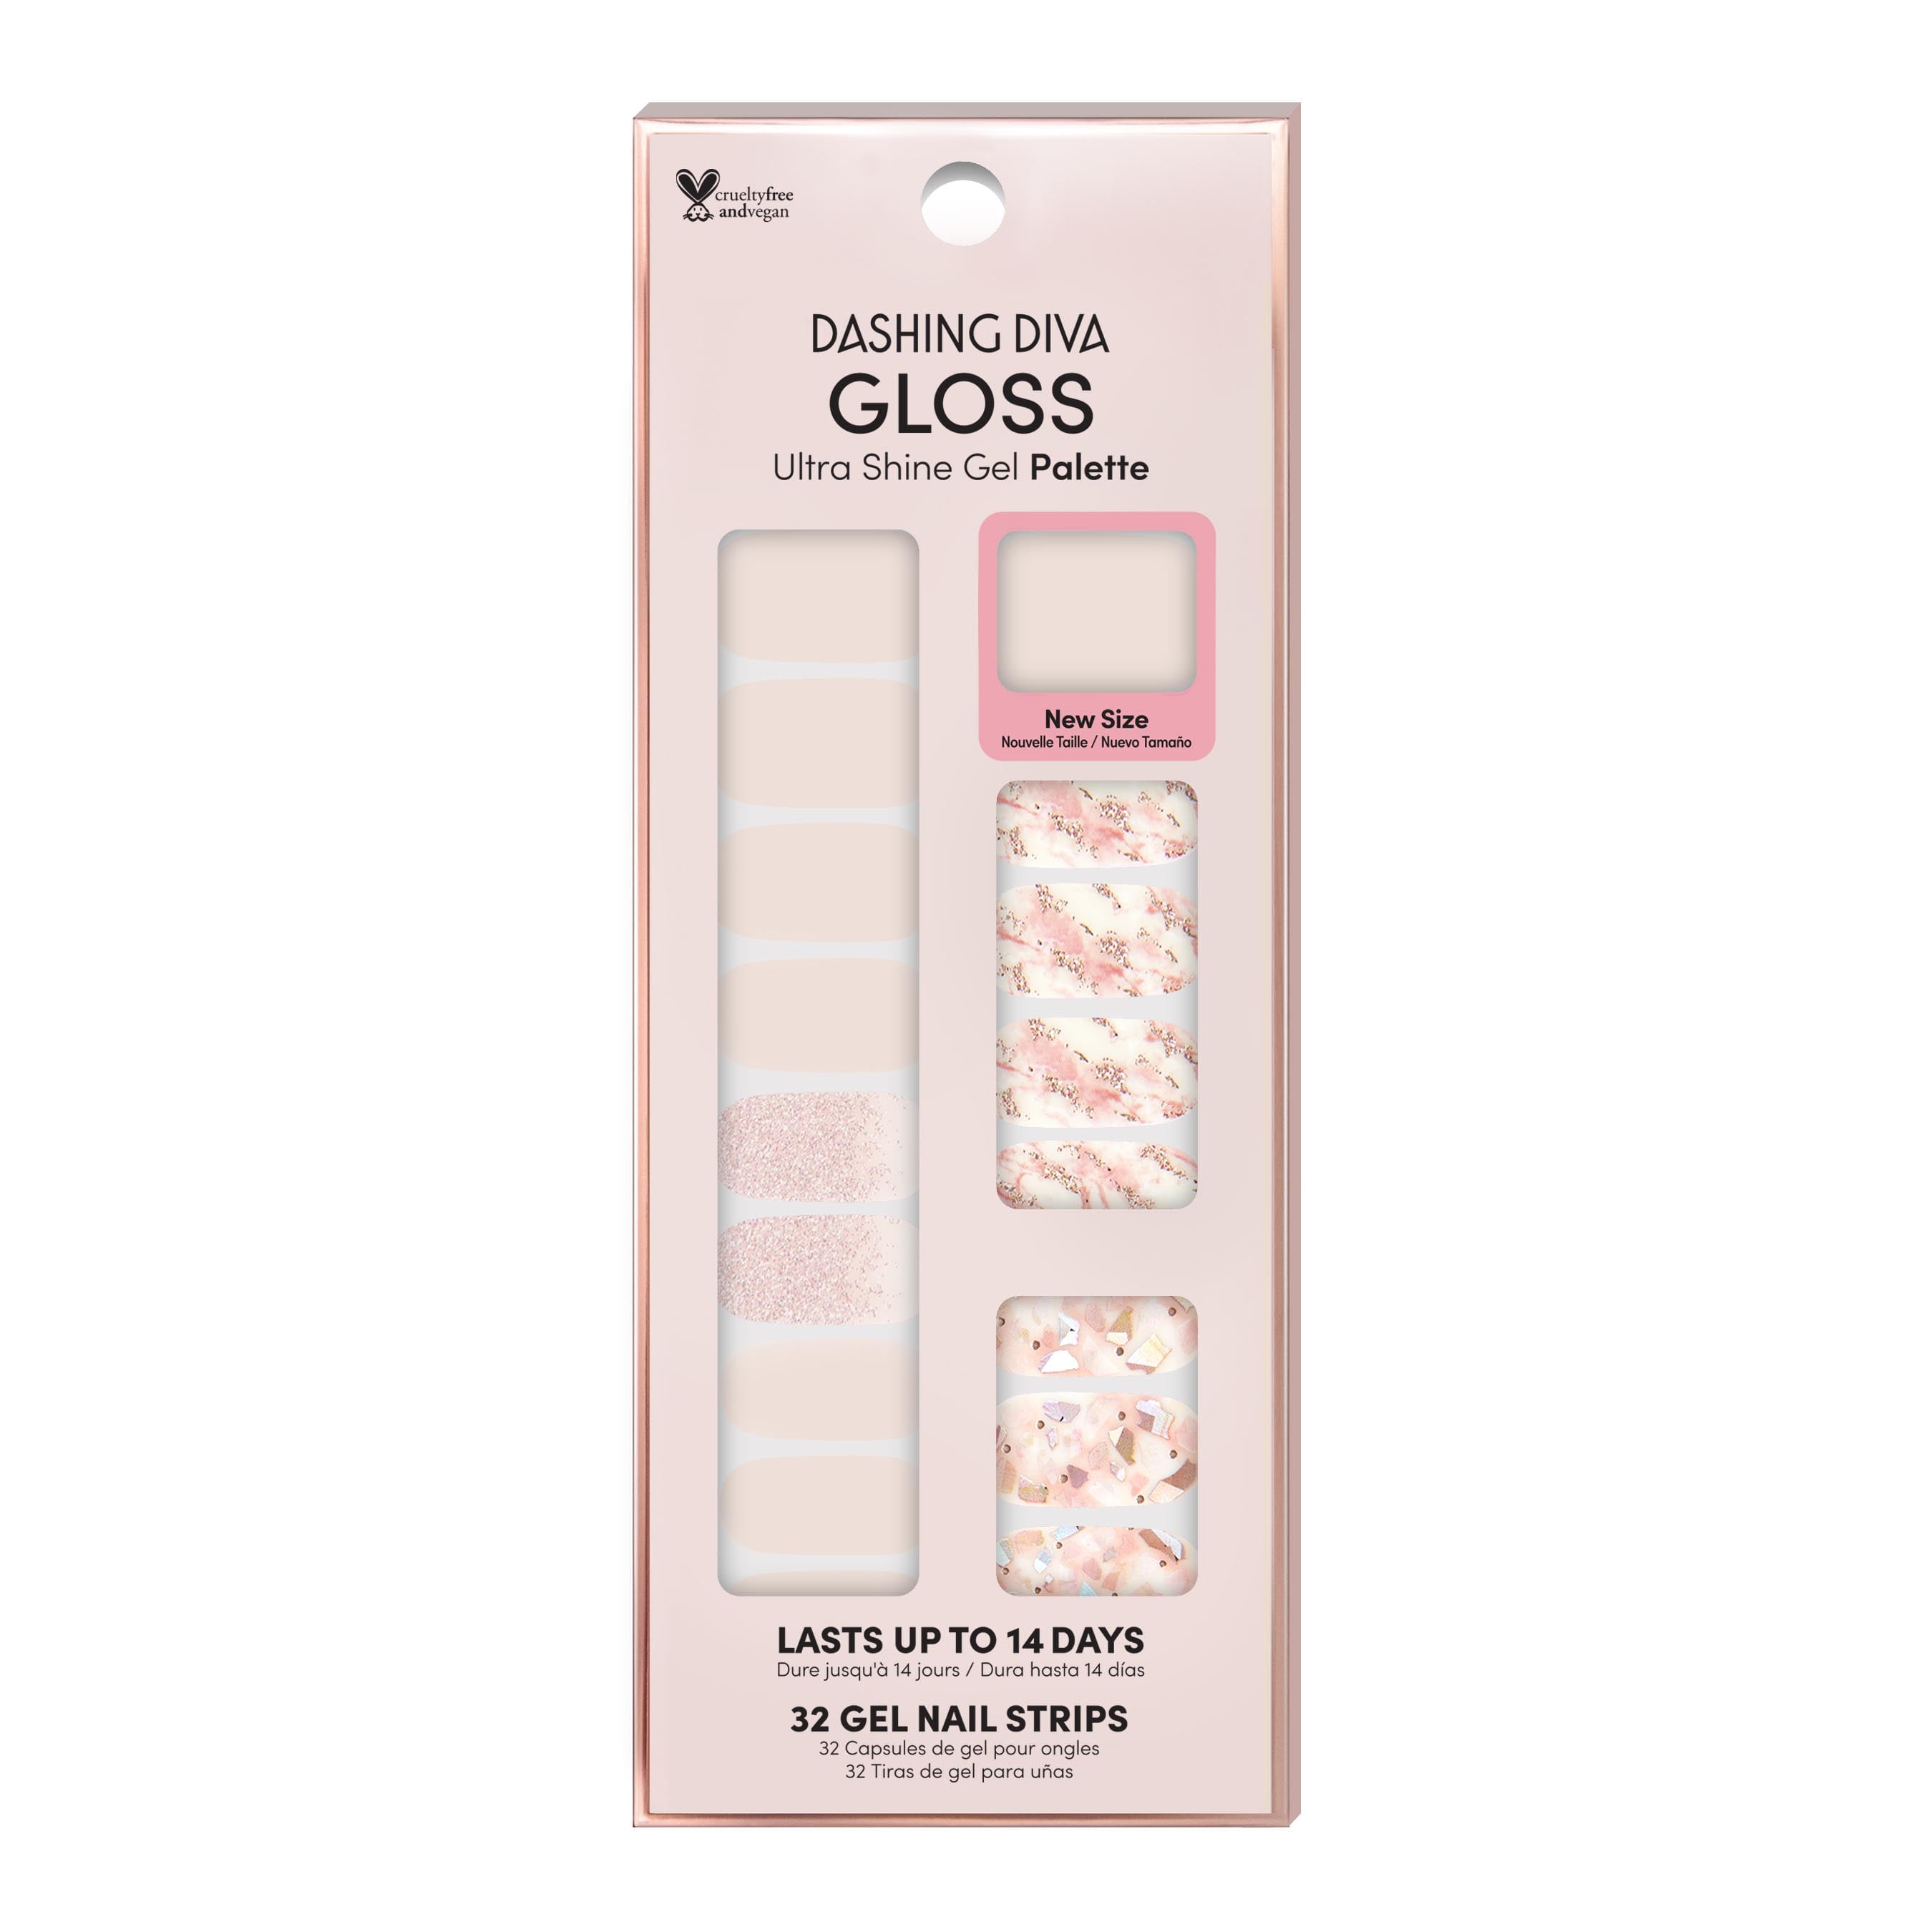 DASHING DIVA GLOSS PALETTE CRYSTAL CLEAR